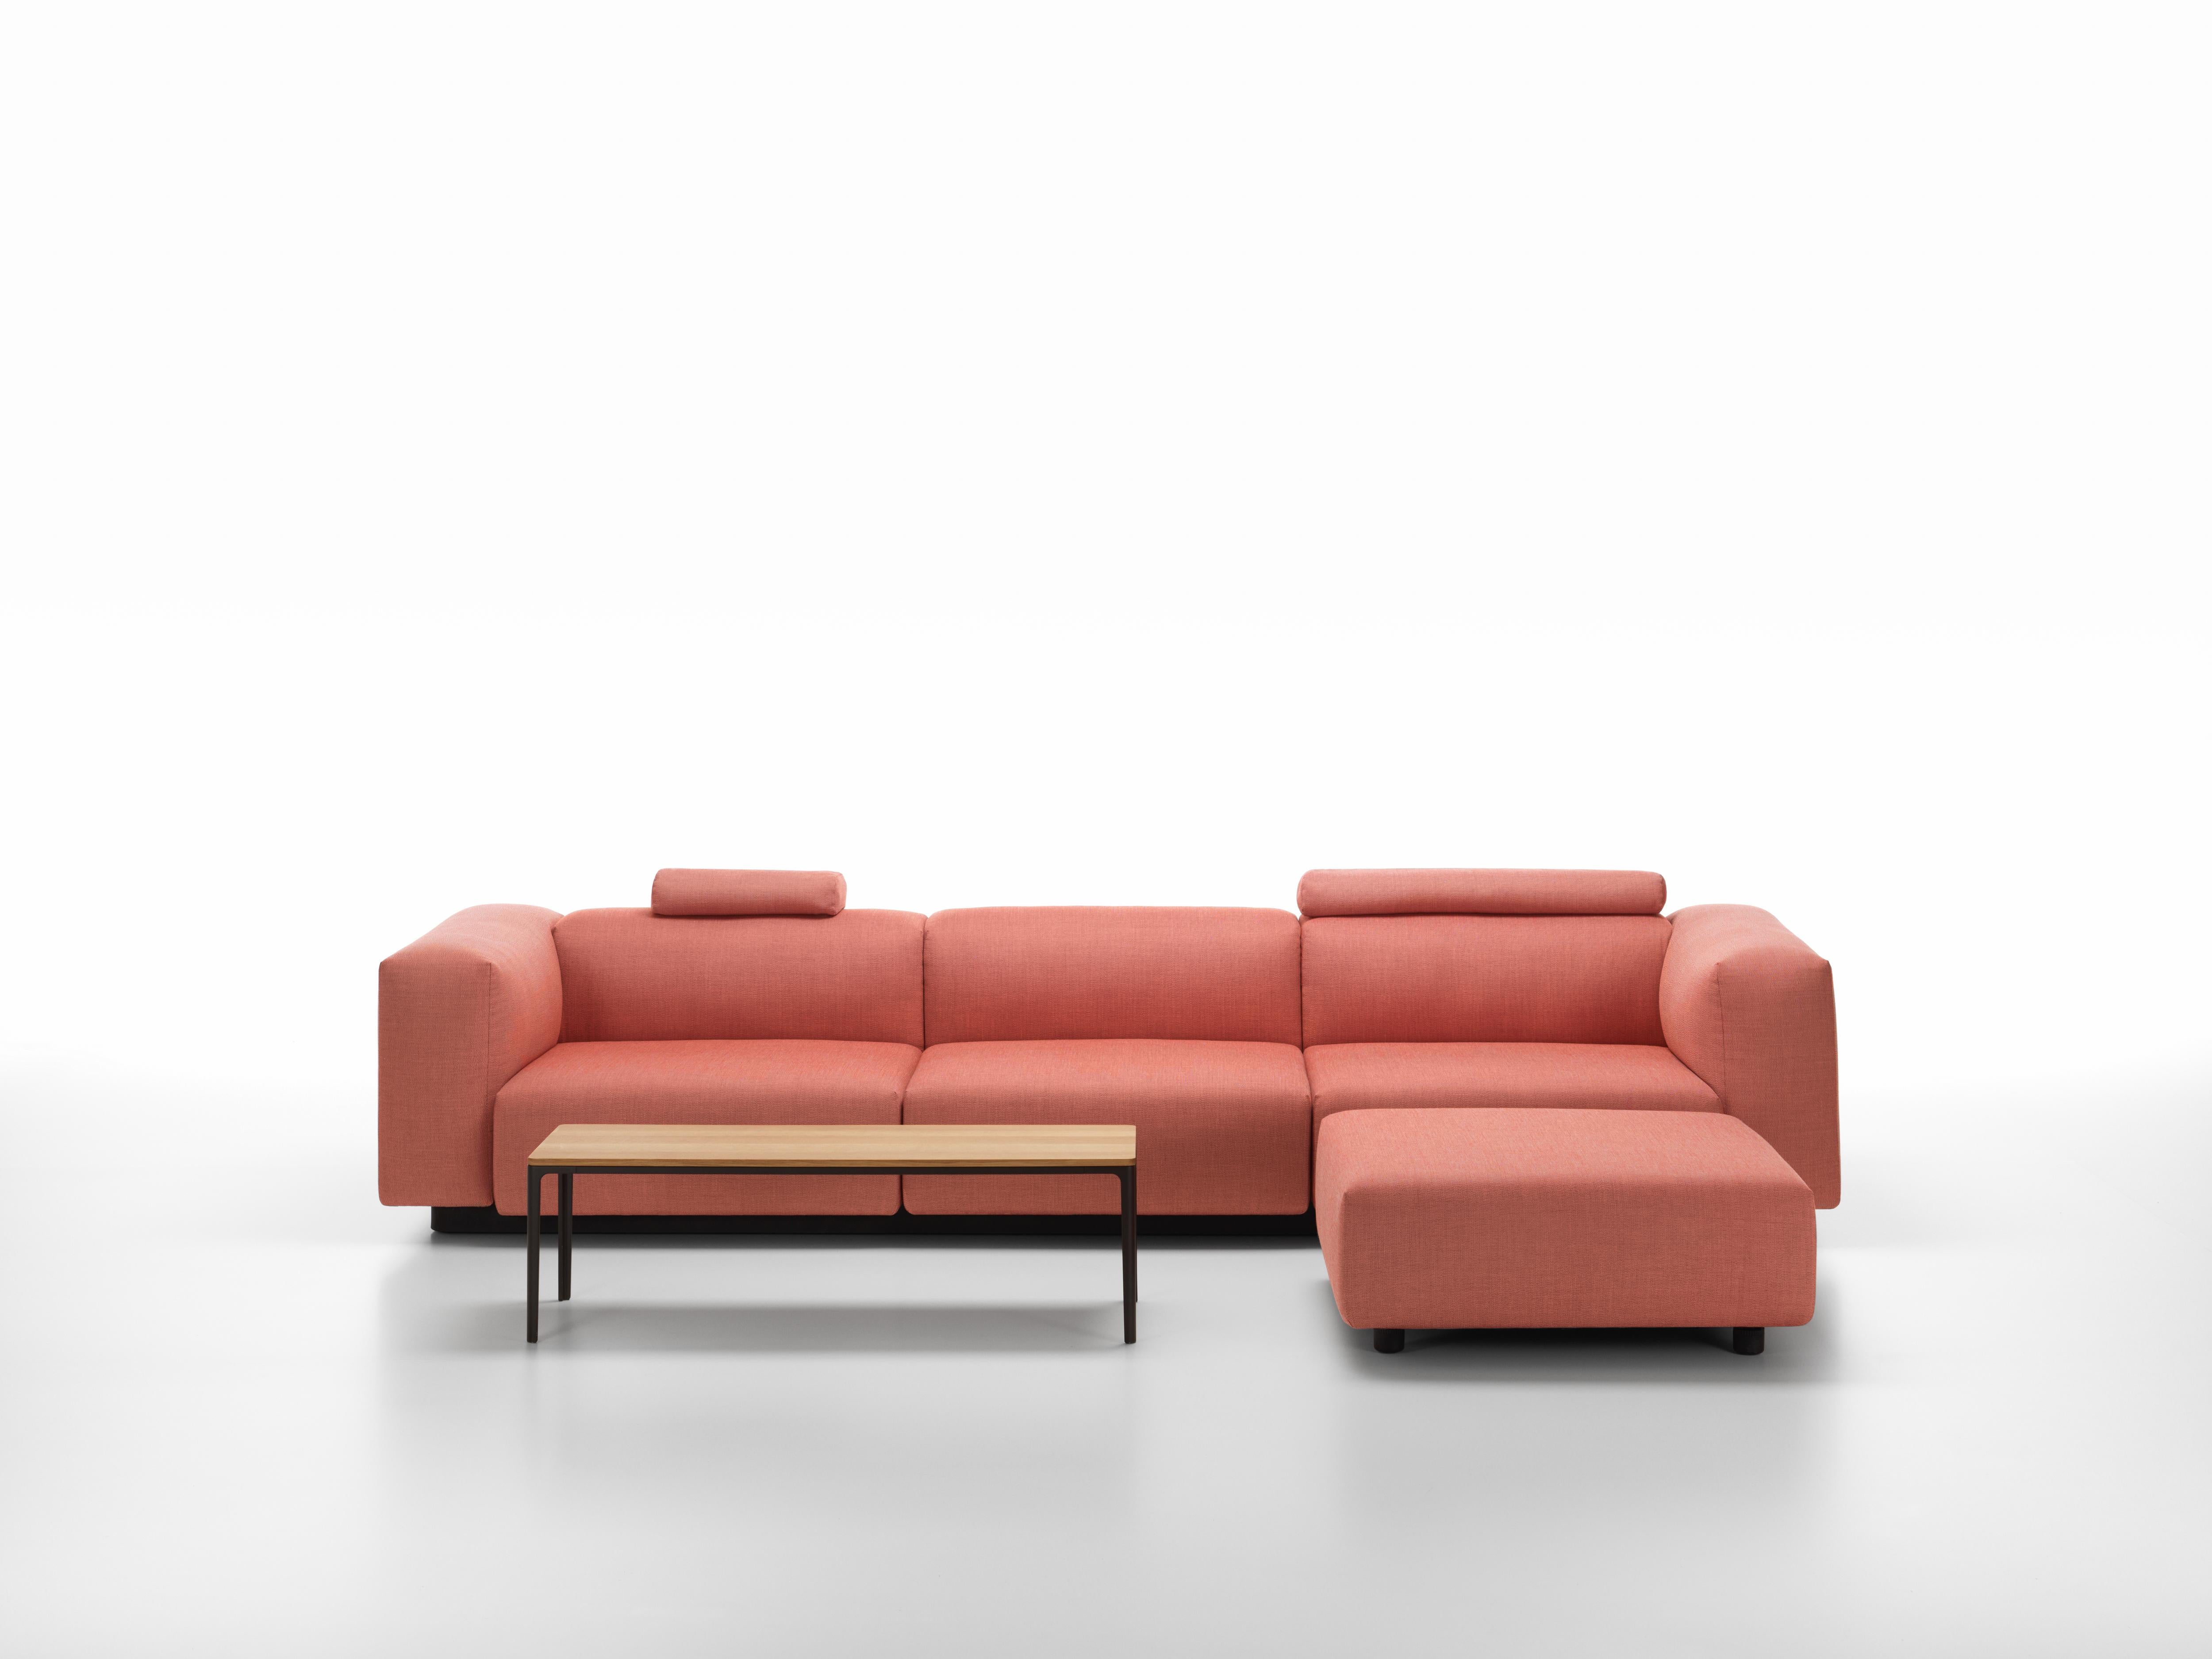 These items are only available in the United States.

The Soft Modular Sofa is Jasper Morrison‘s updated interpretation of what has become a modern classic: the low-slung modular sofa with a decidedly horizontal emphasis. Uniting carefully balanced